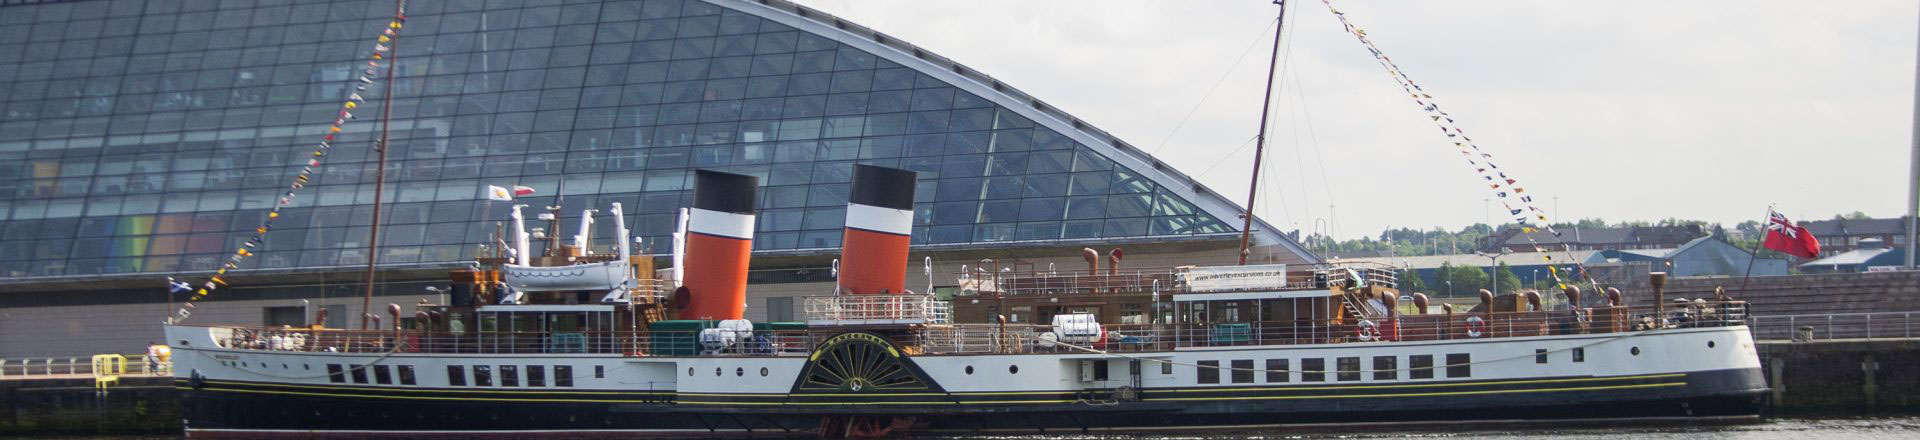 waverley excursions from glasgow